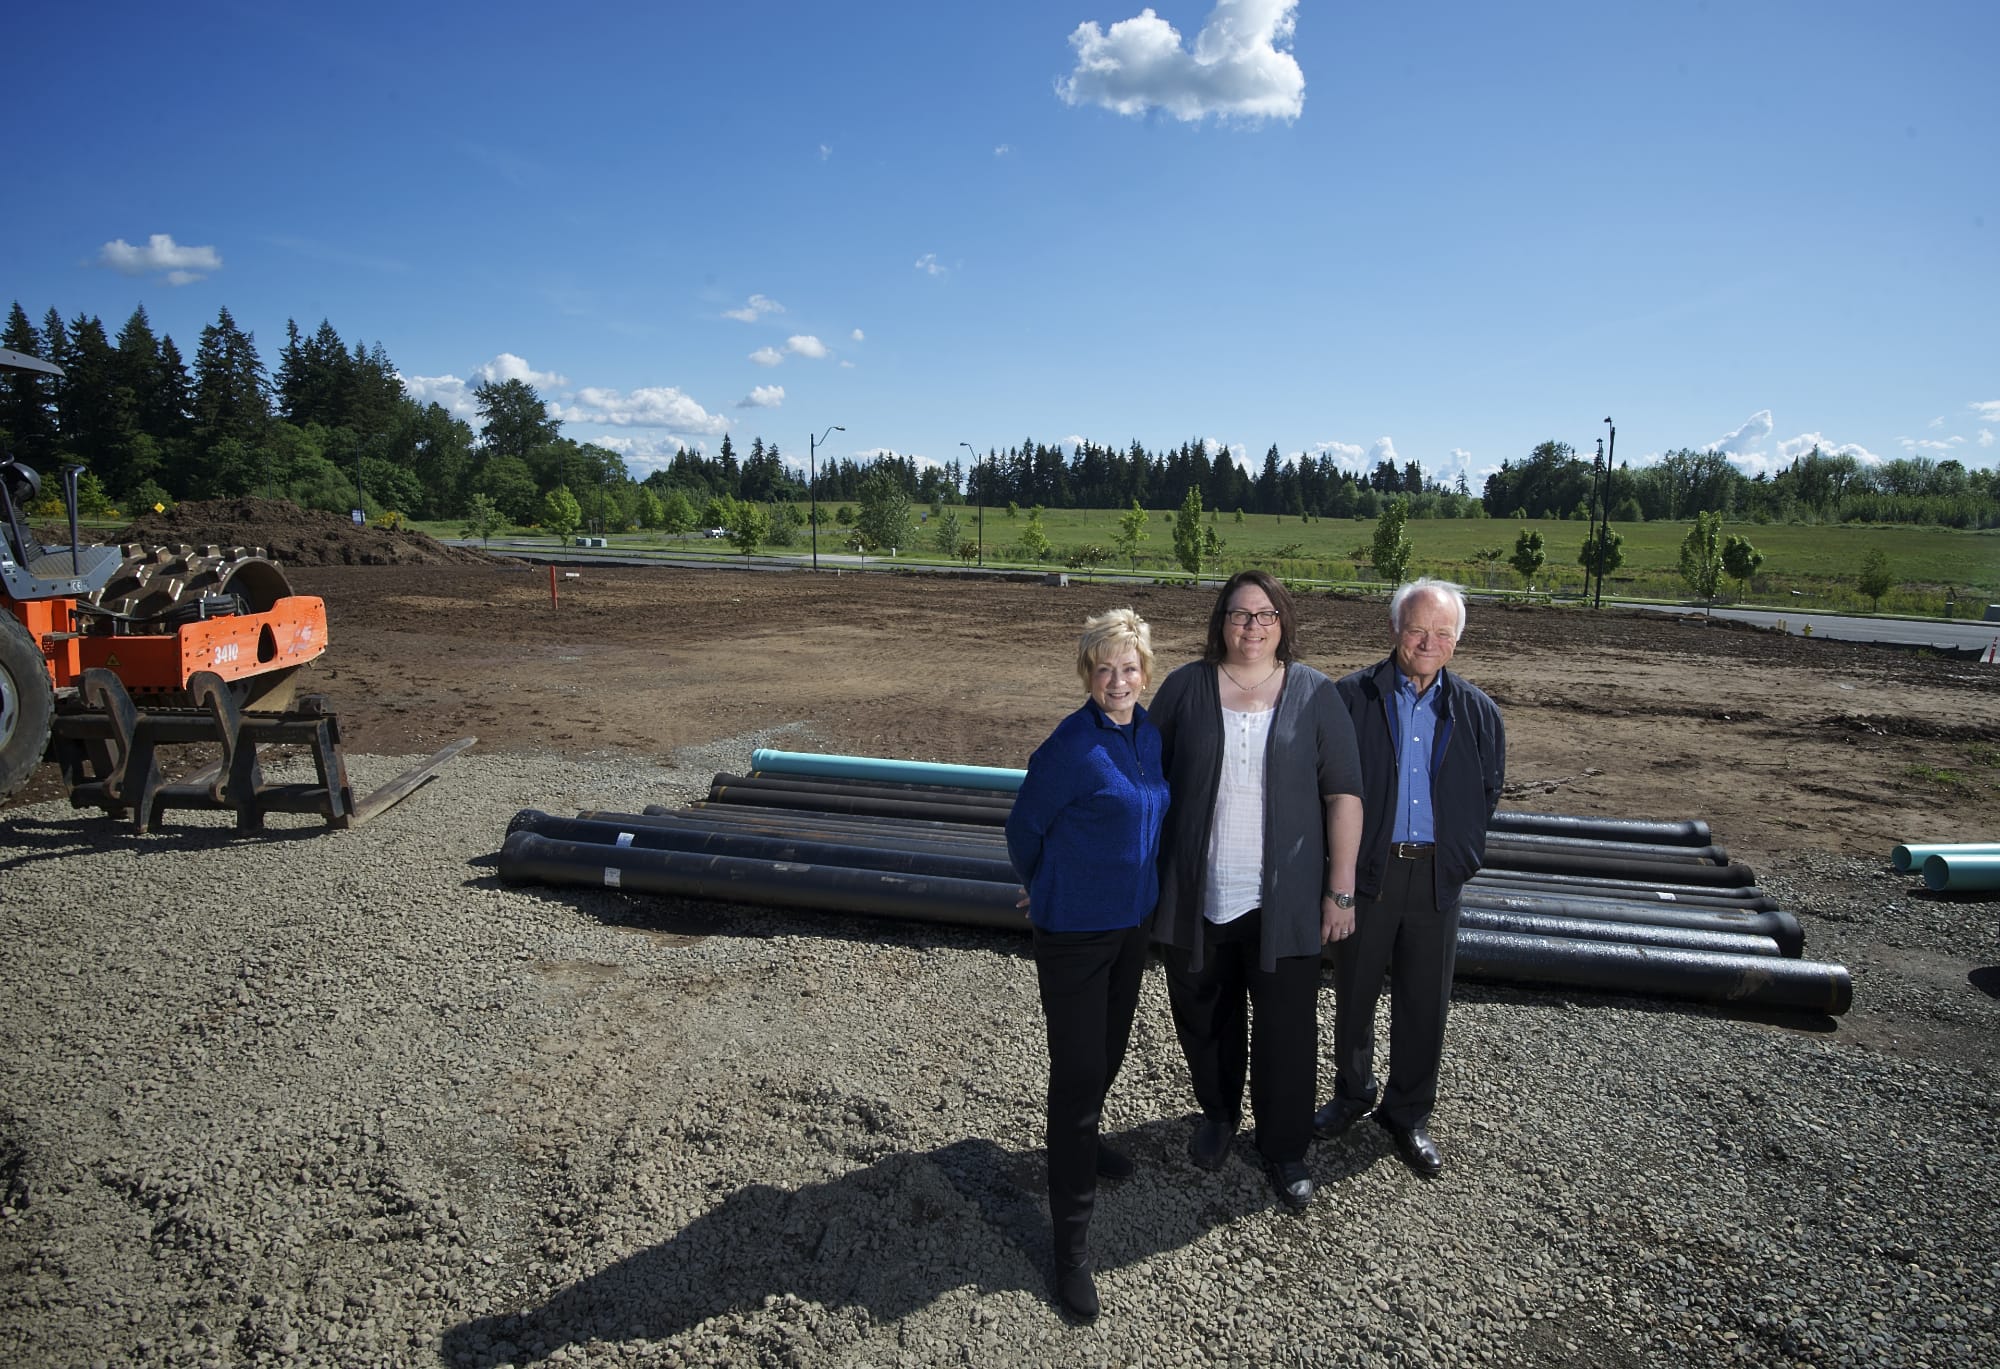 Kris Vockler, center, chief executive officer of Vancouver-based ICD High Performance Coatings, and her parents, Patricia and Larry Vockler, company founders, visit the Ridgefield construction site where the firm's larger production facility will be built.